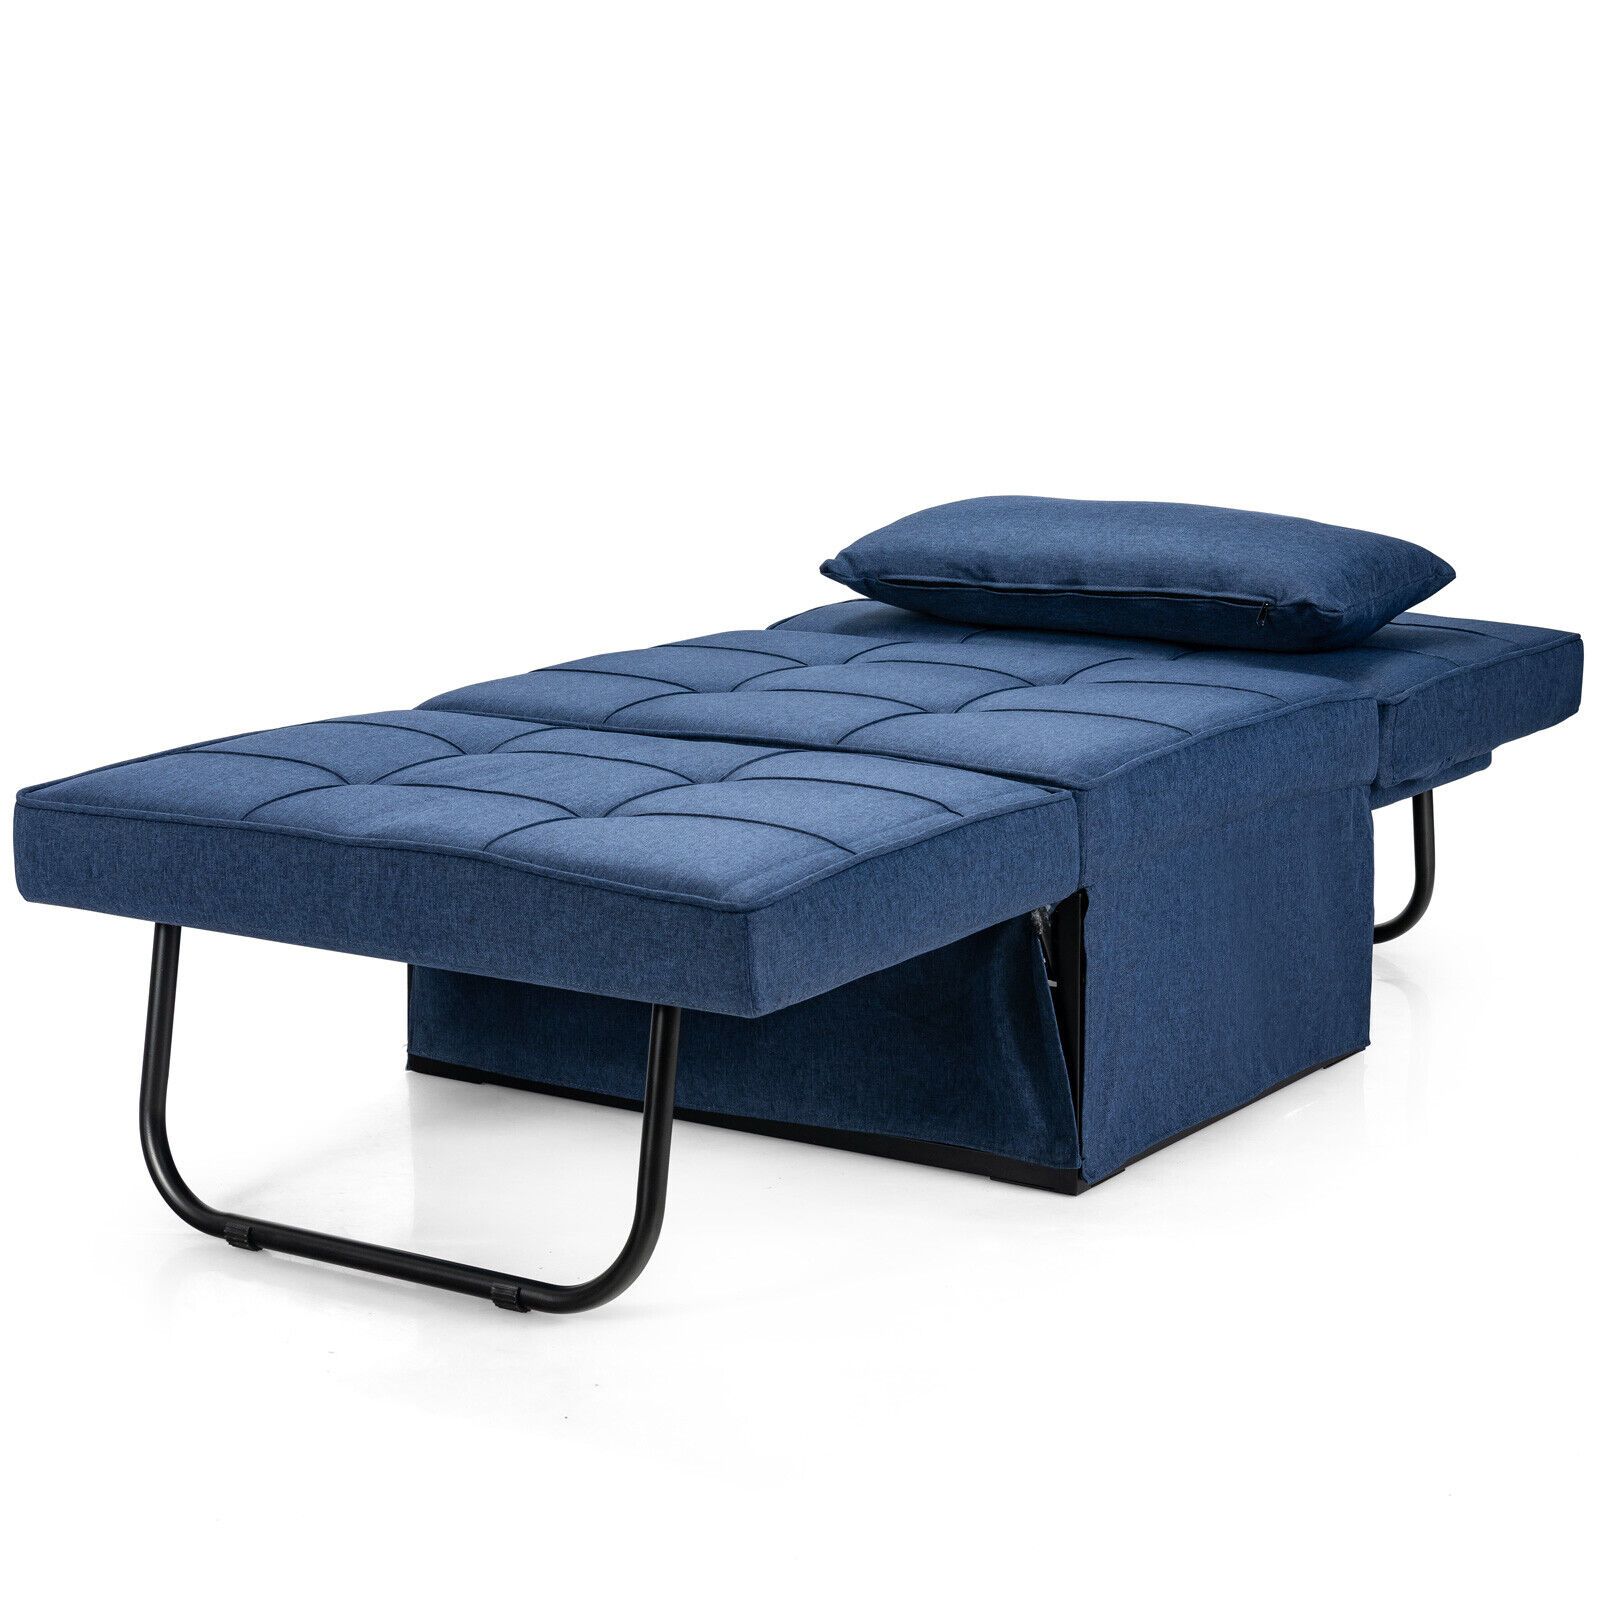 Costway 4 In 1 Multi Function Sofa Bed Convertible Sleeper Folding Ottoman  Blue | Ebay In Blue Folding Bed Ottomans (View 11 of 15)